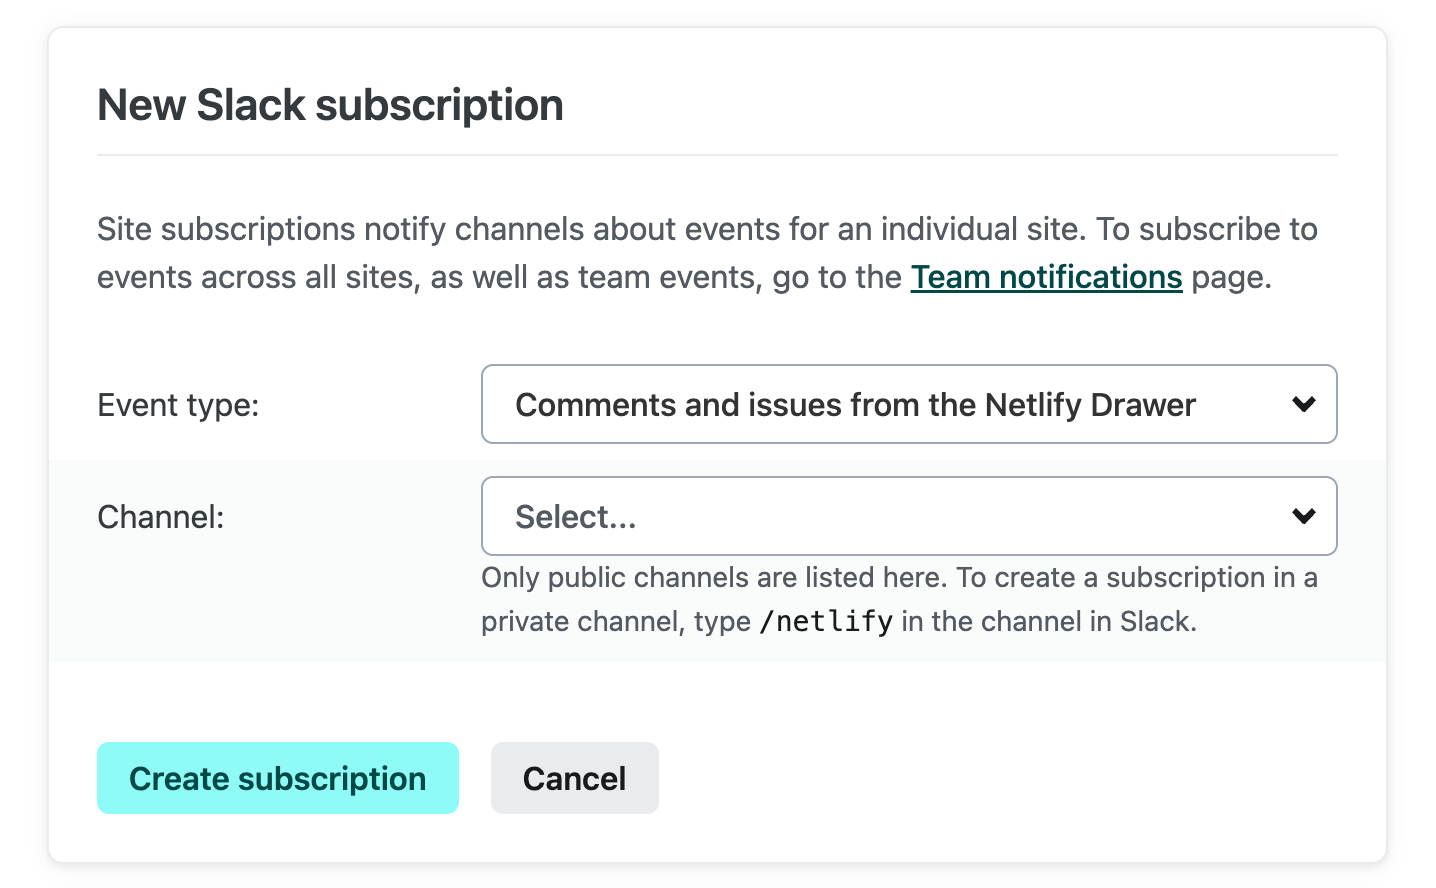 The subscription form with the comments and issues event type selected